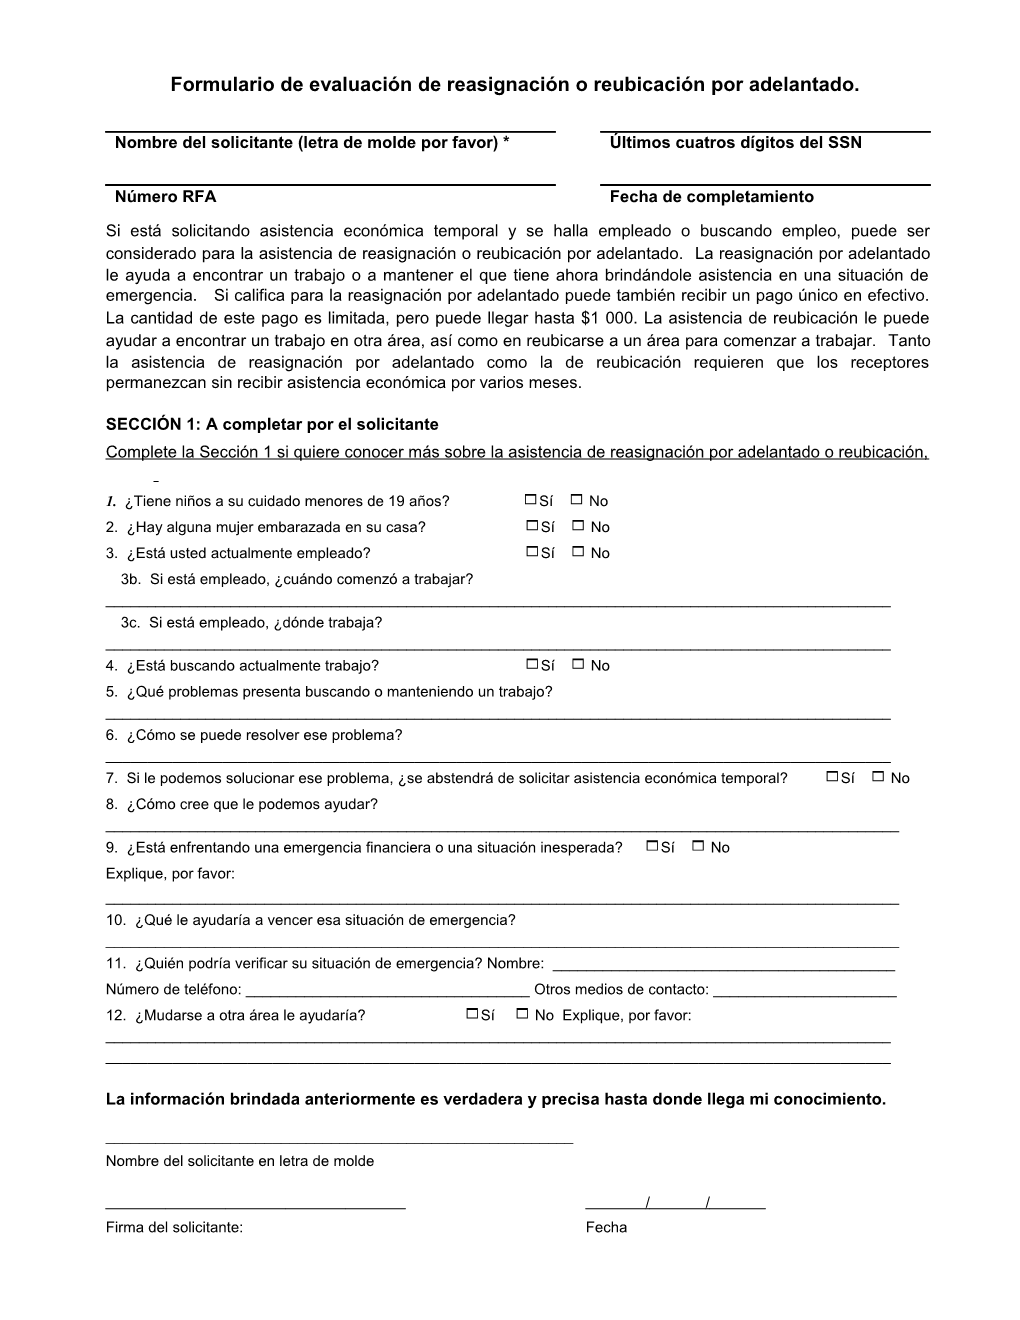 Up-Front Diversion/Relocation Screening Form